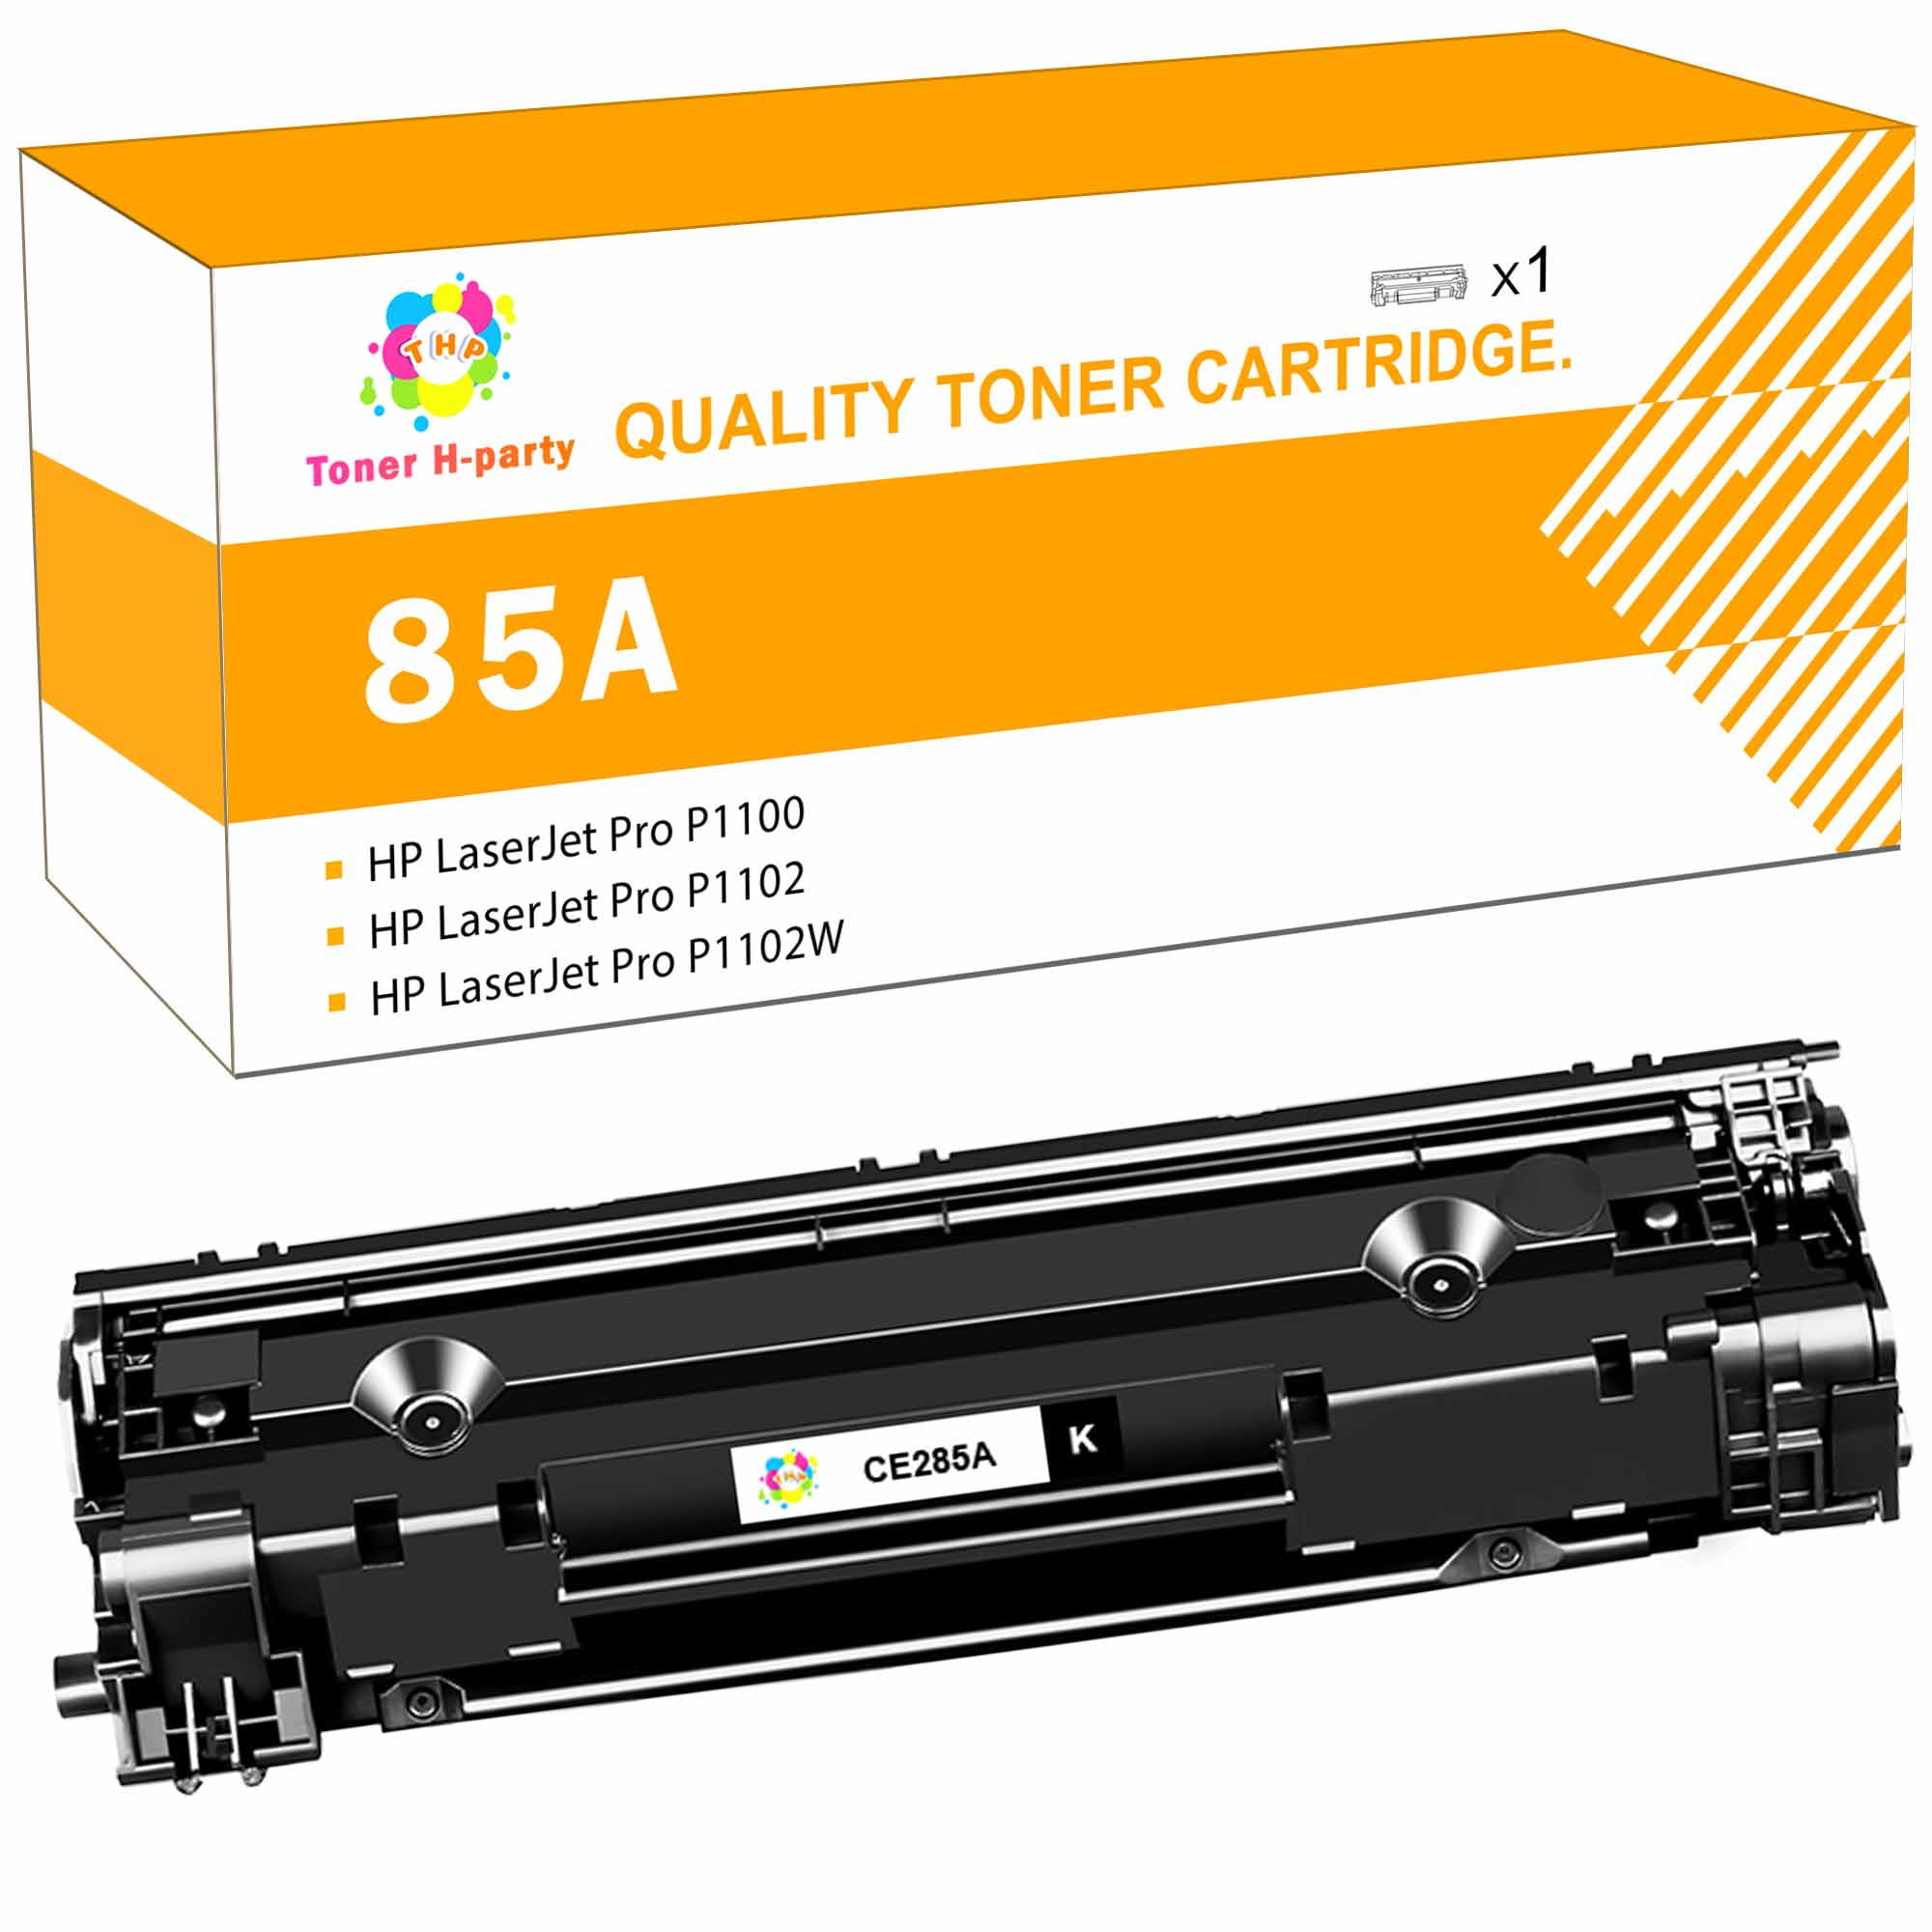 Toner H-Party 1-Pack Compatible Cartridge for 85A CE285A P1102w Toner Replacement Used for HP Pro P1102w M1212nf P1102 P1109w M1217nfw 1102w Printer Ink (Black,1-Pack) - Walmart.com